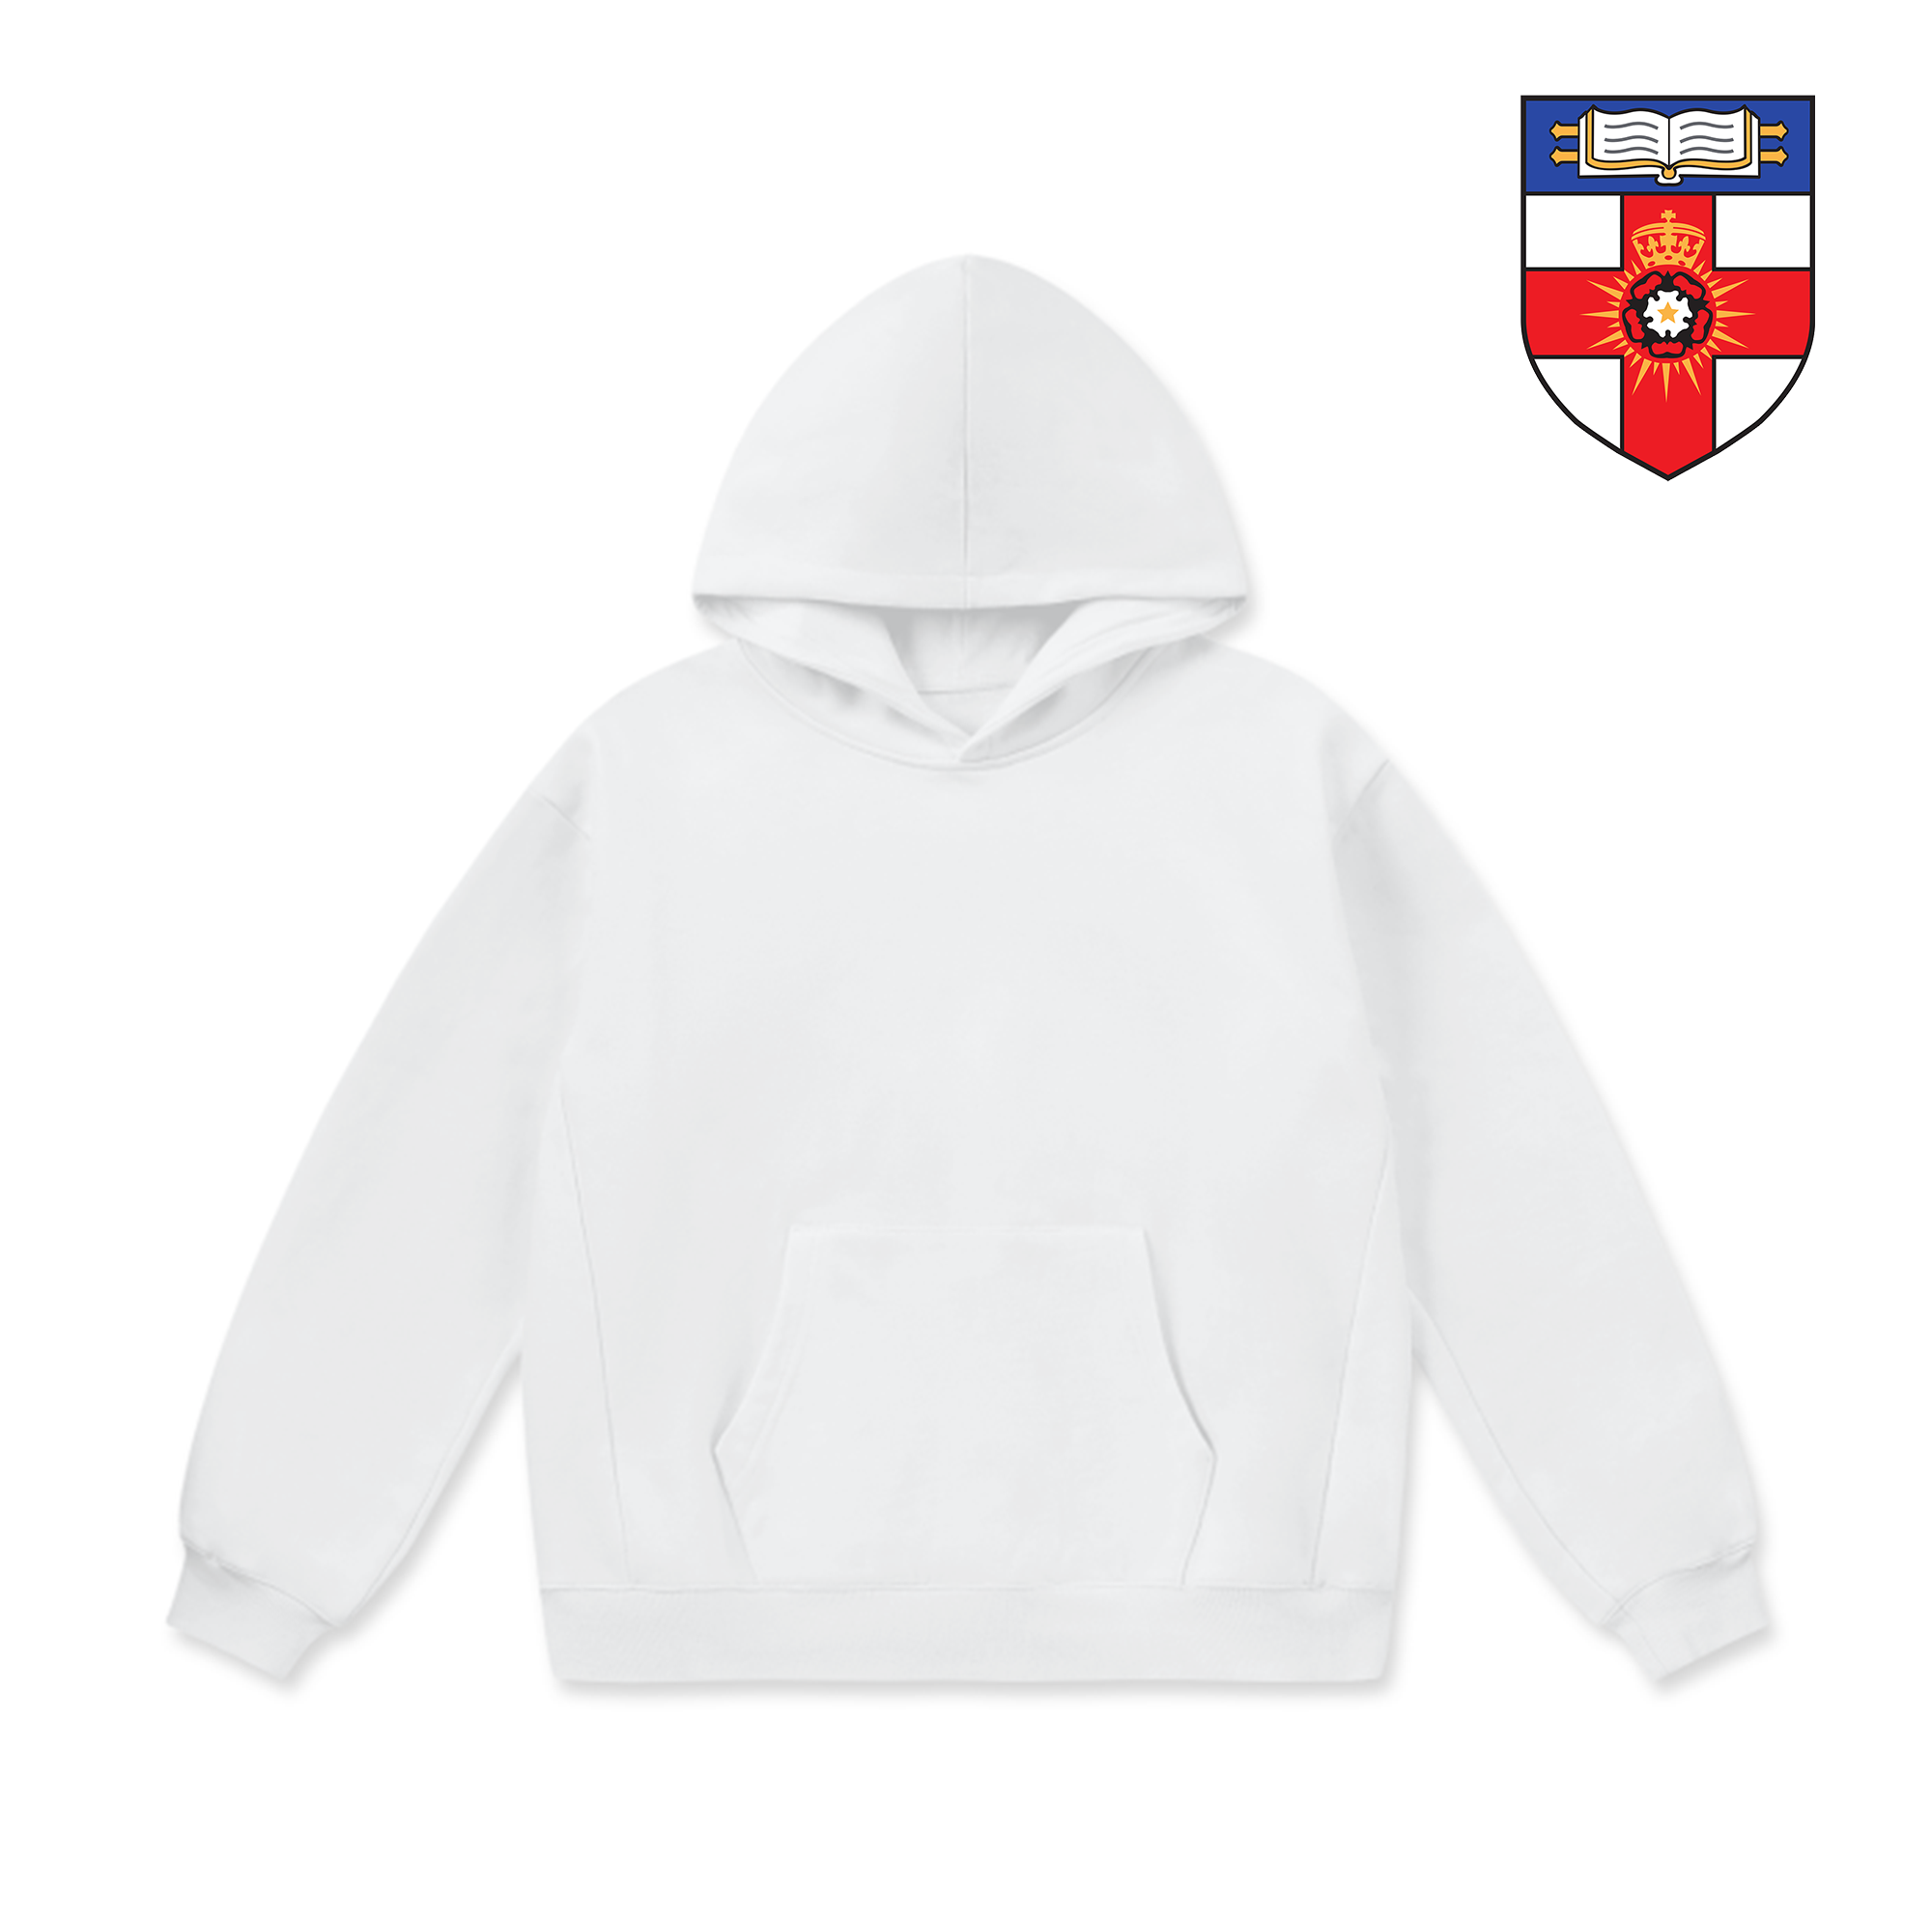 LCC Super Weighted Hoodie - University of London (Classic)